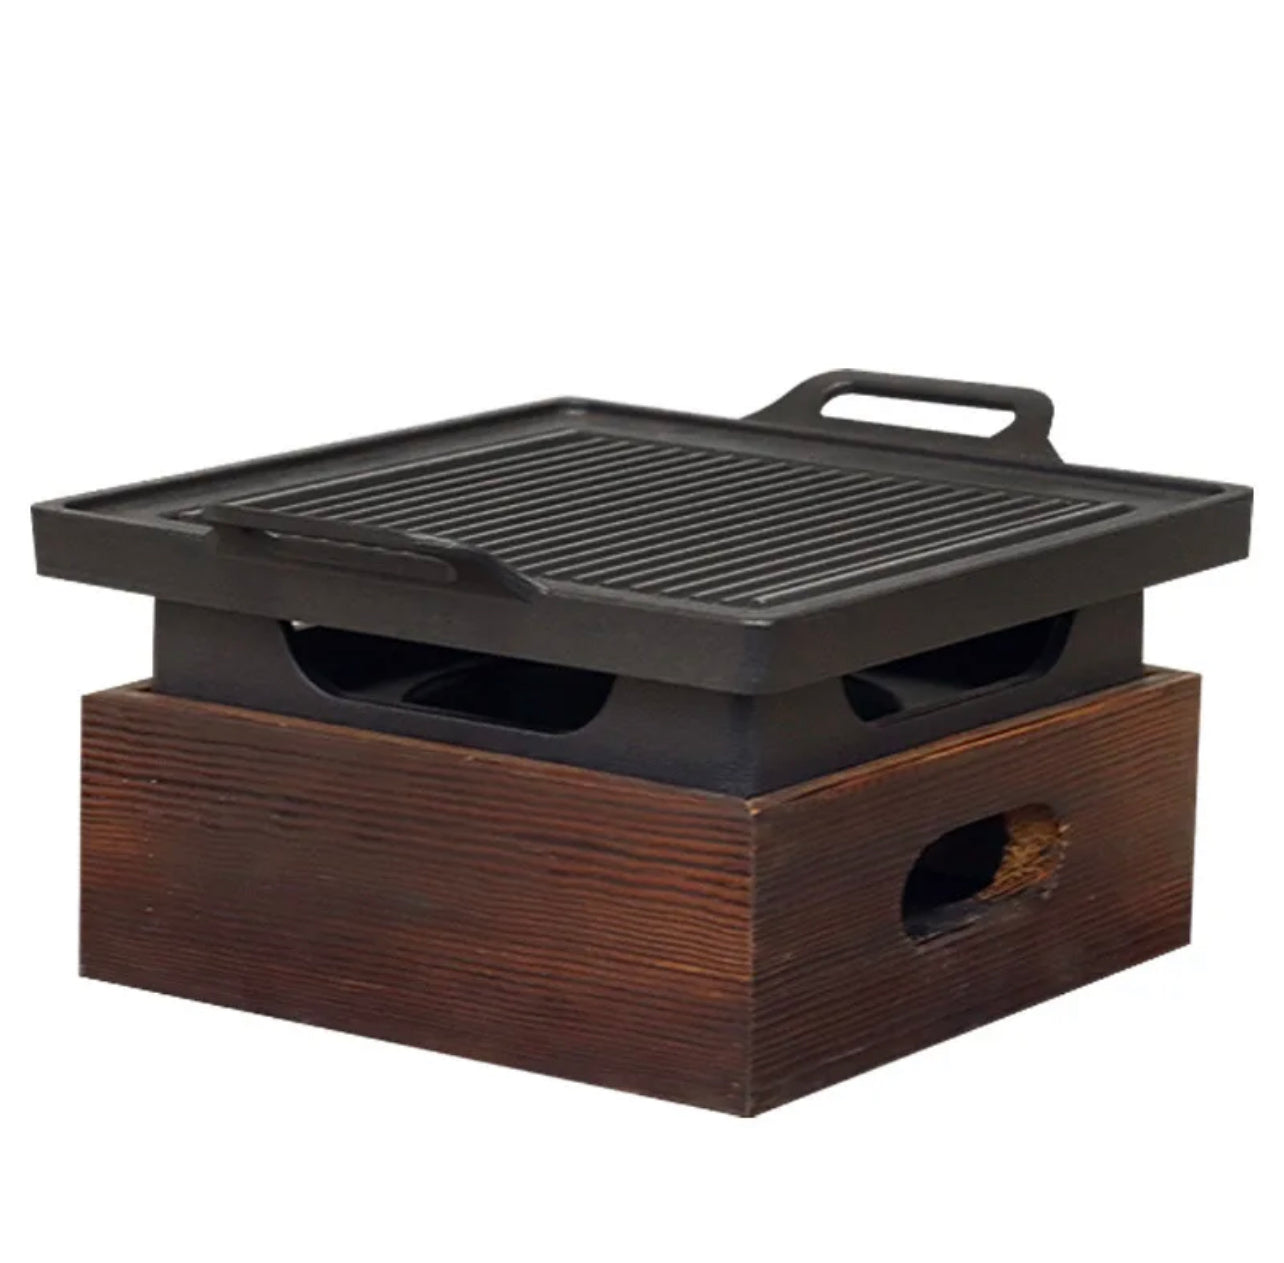 Sturdy, Smokeless indoor hibachi grill for Outdoor Party 